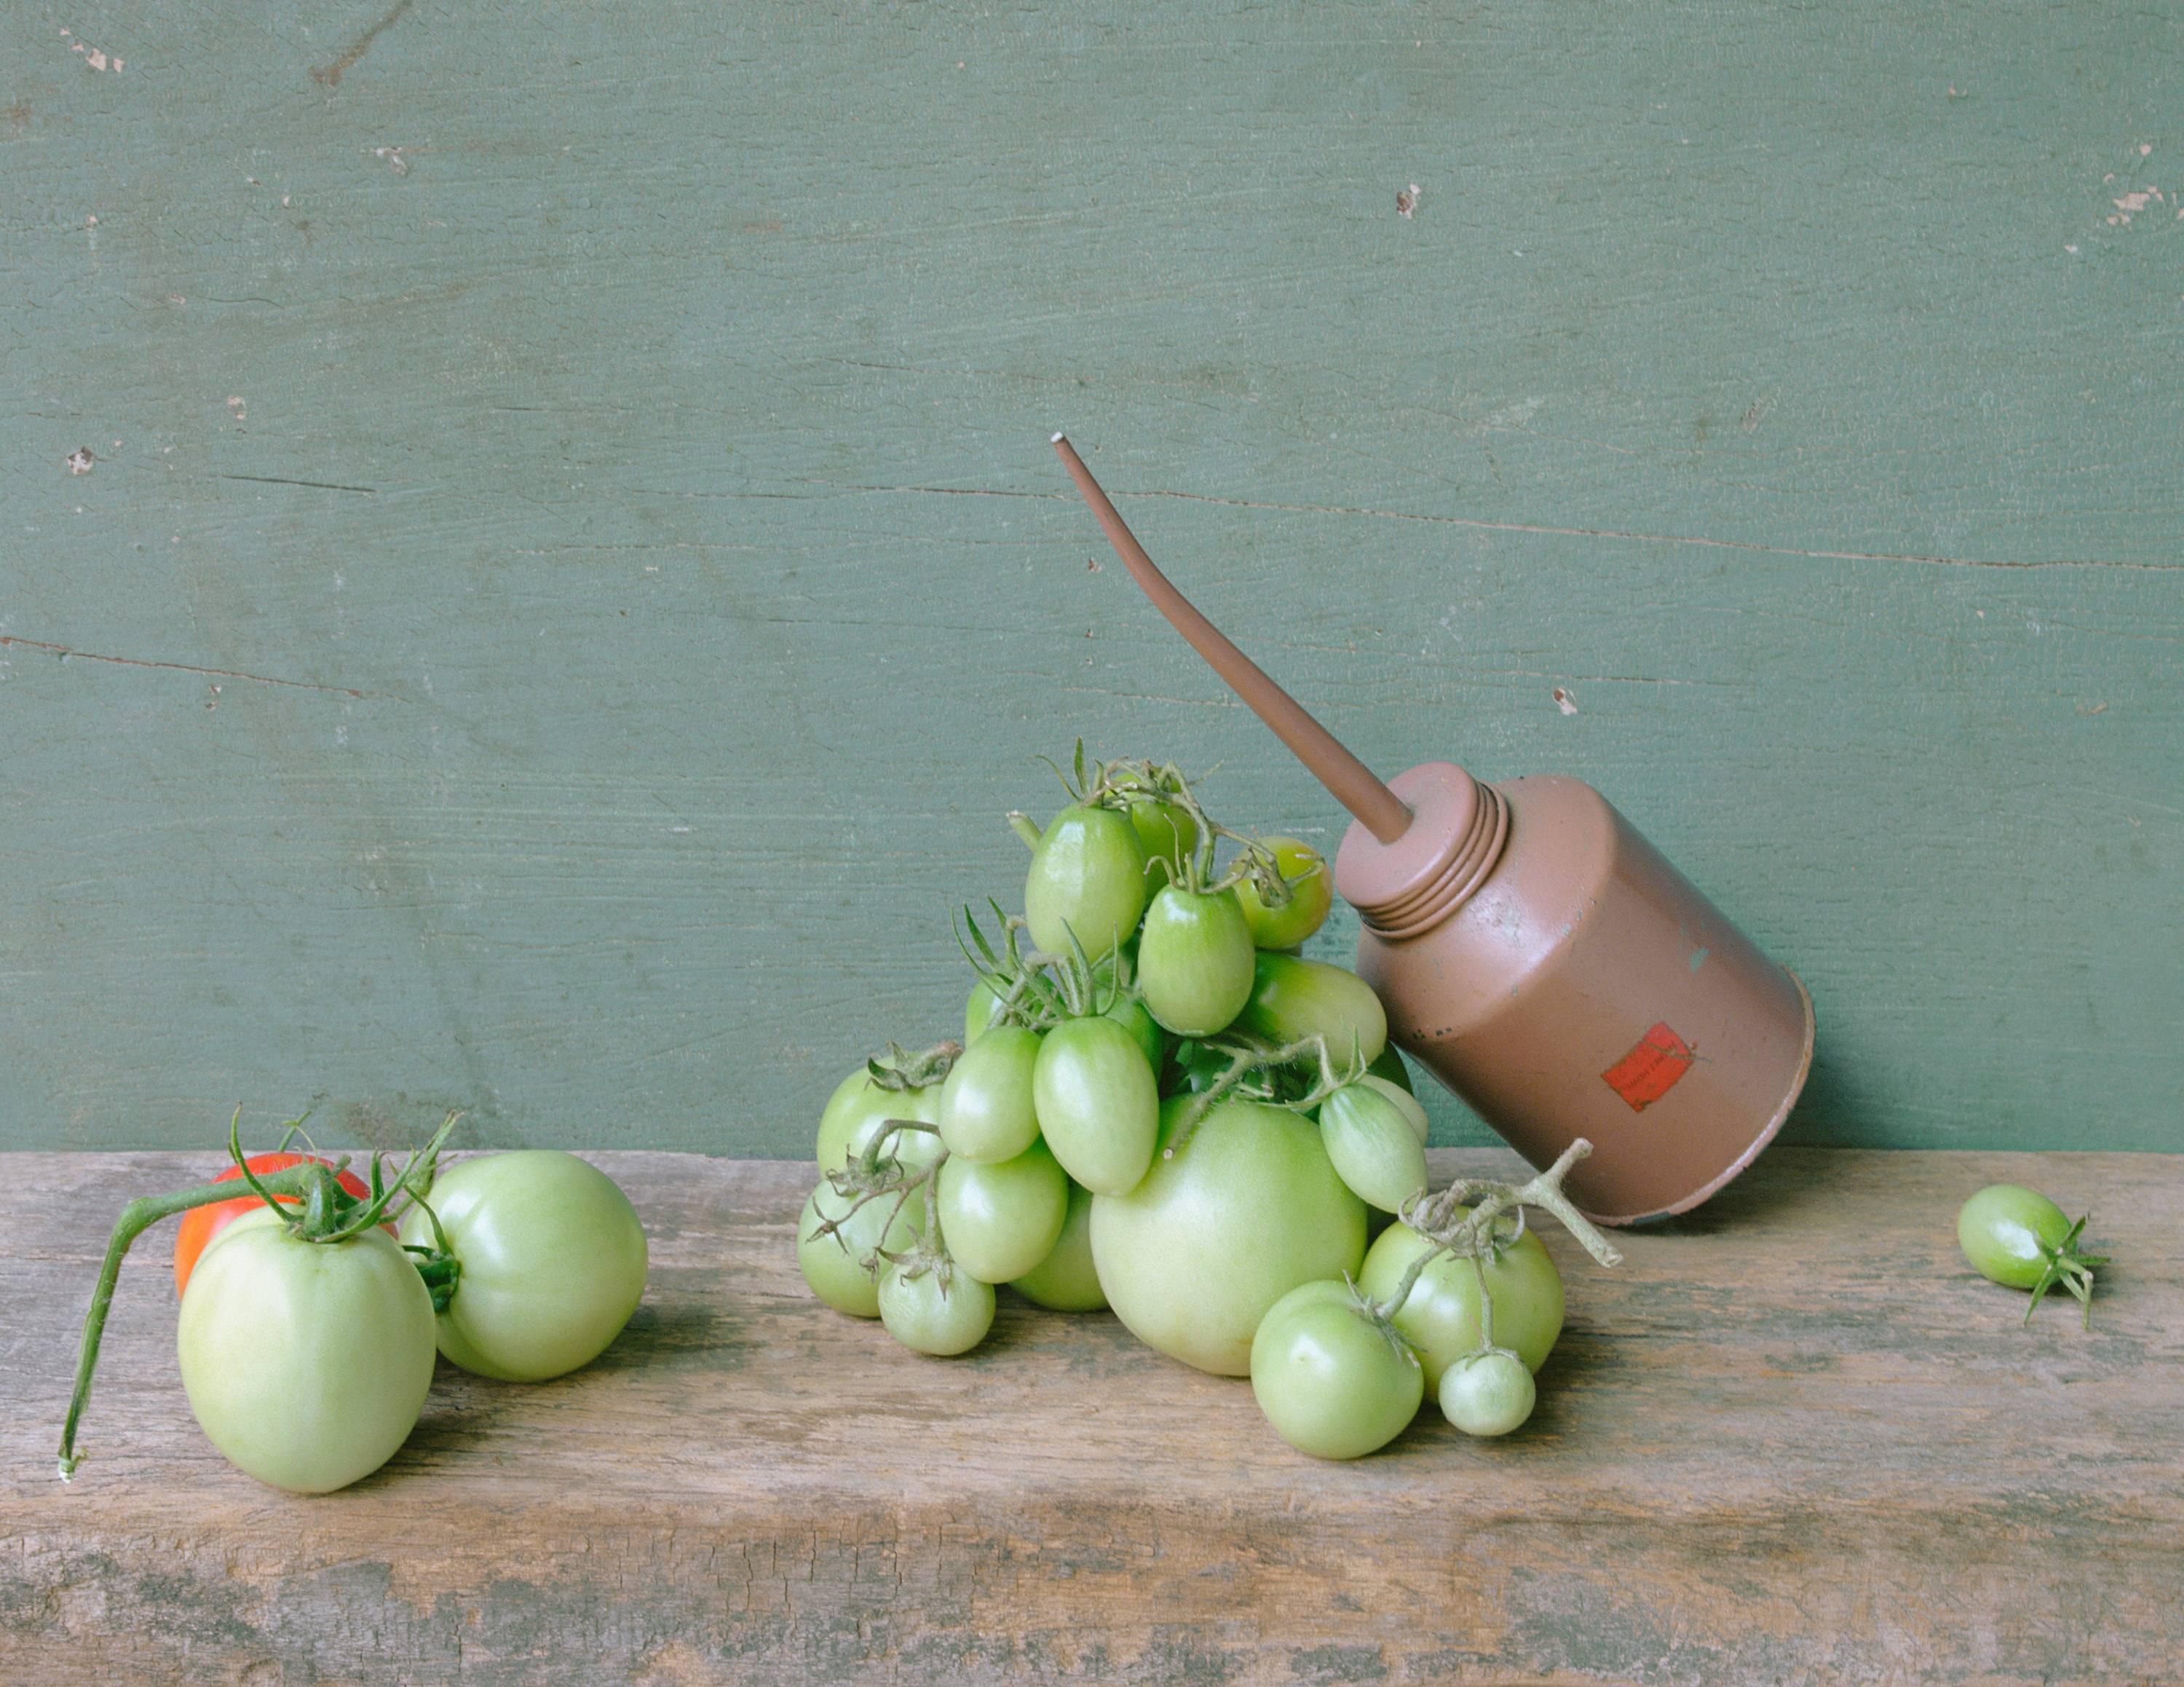 David Halliday Color Photograph - Green Tomatoes & Oil Can: Modern Still Life Photograph of Food & Objects, Framed